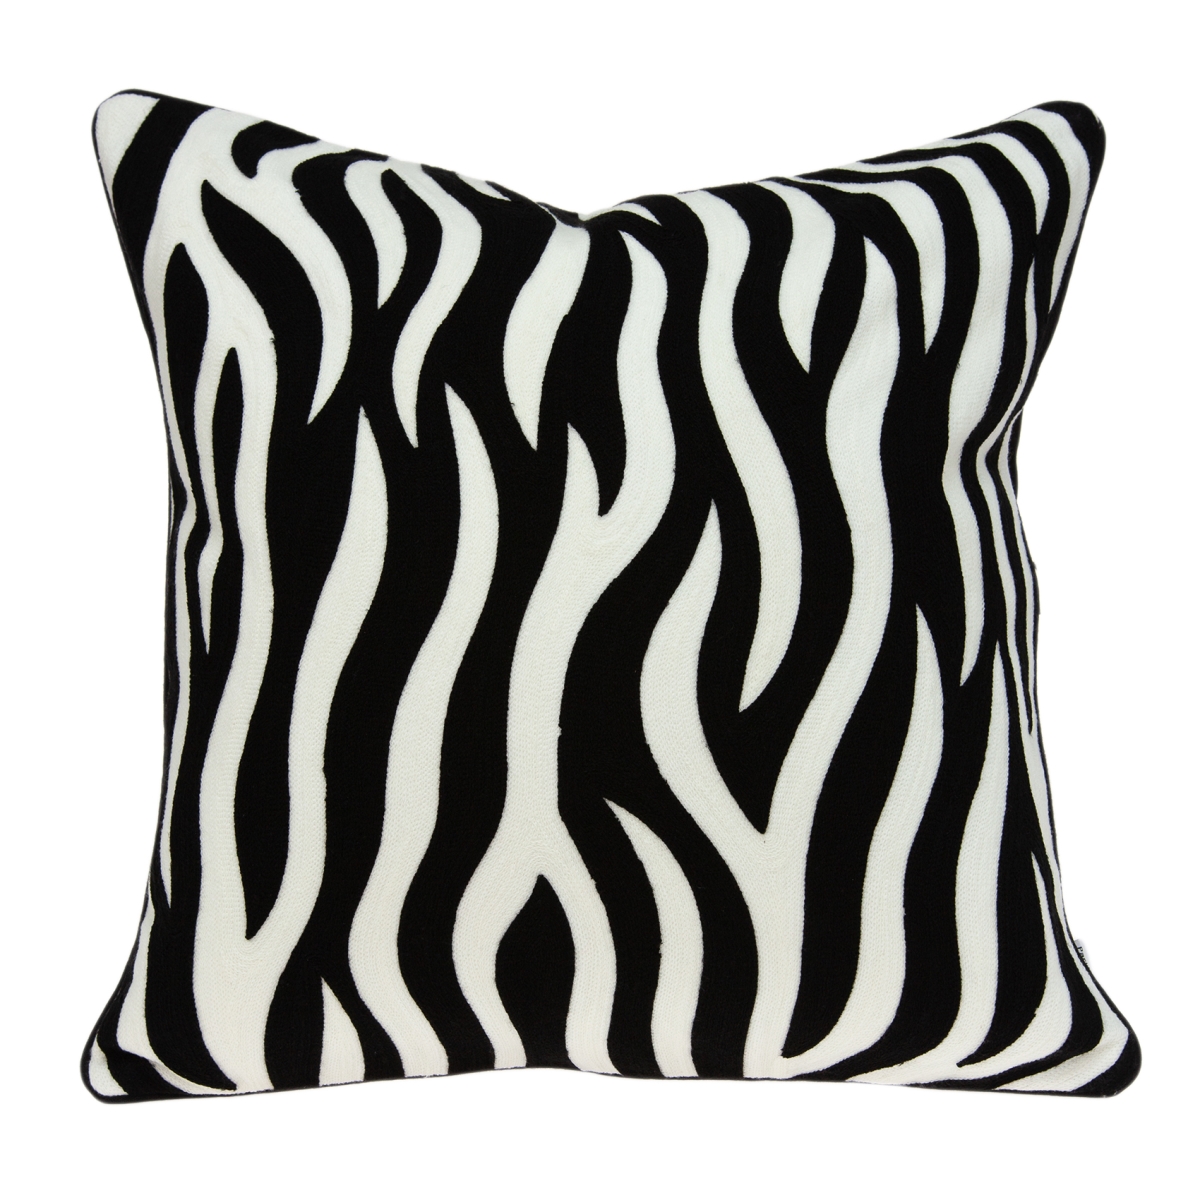 Pila11003d Simba Black & White Square Transitional Pillow Cover With Down Insert - 20 X 20 X 7 In.